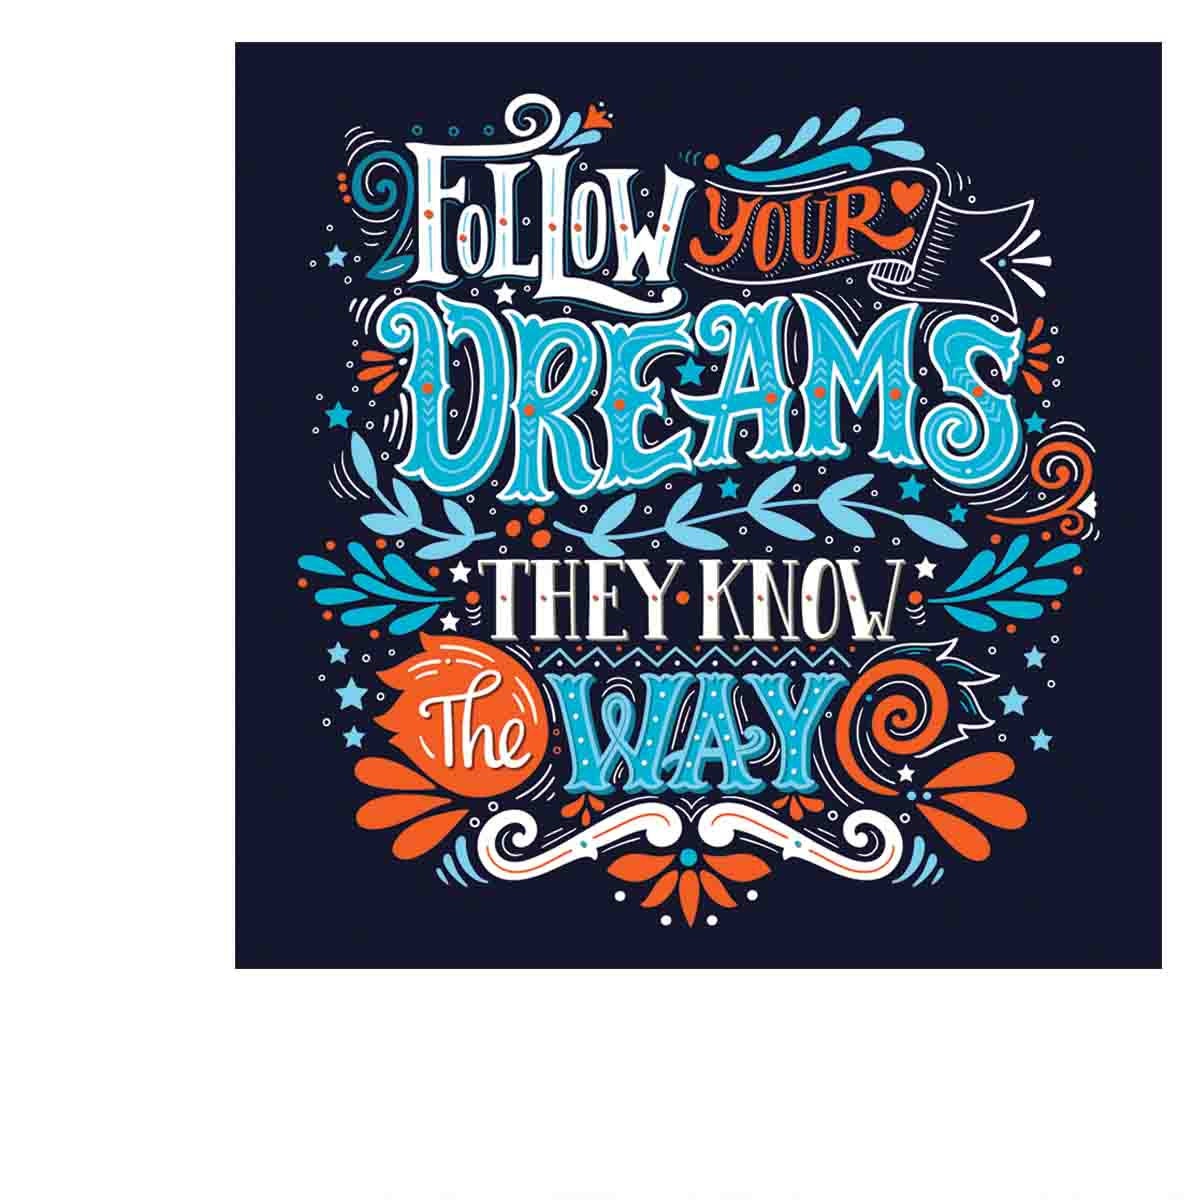 Follow Your Dreams They Know the Way. Inspirational Quote. Hand Drawn Vintage Illustration Wallpaper Bedroom Mural